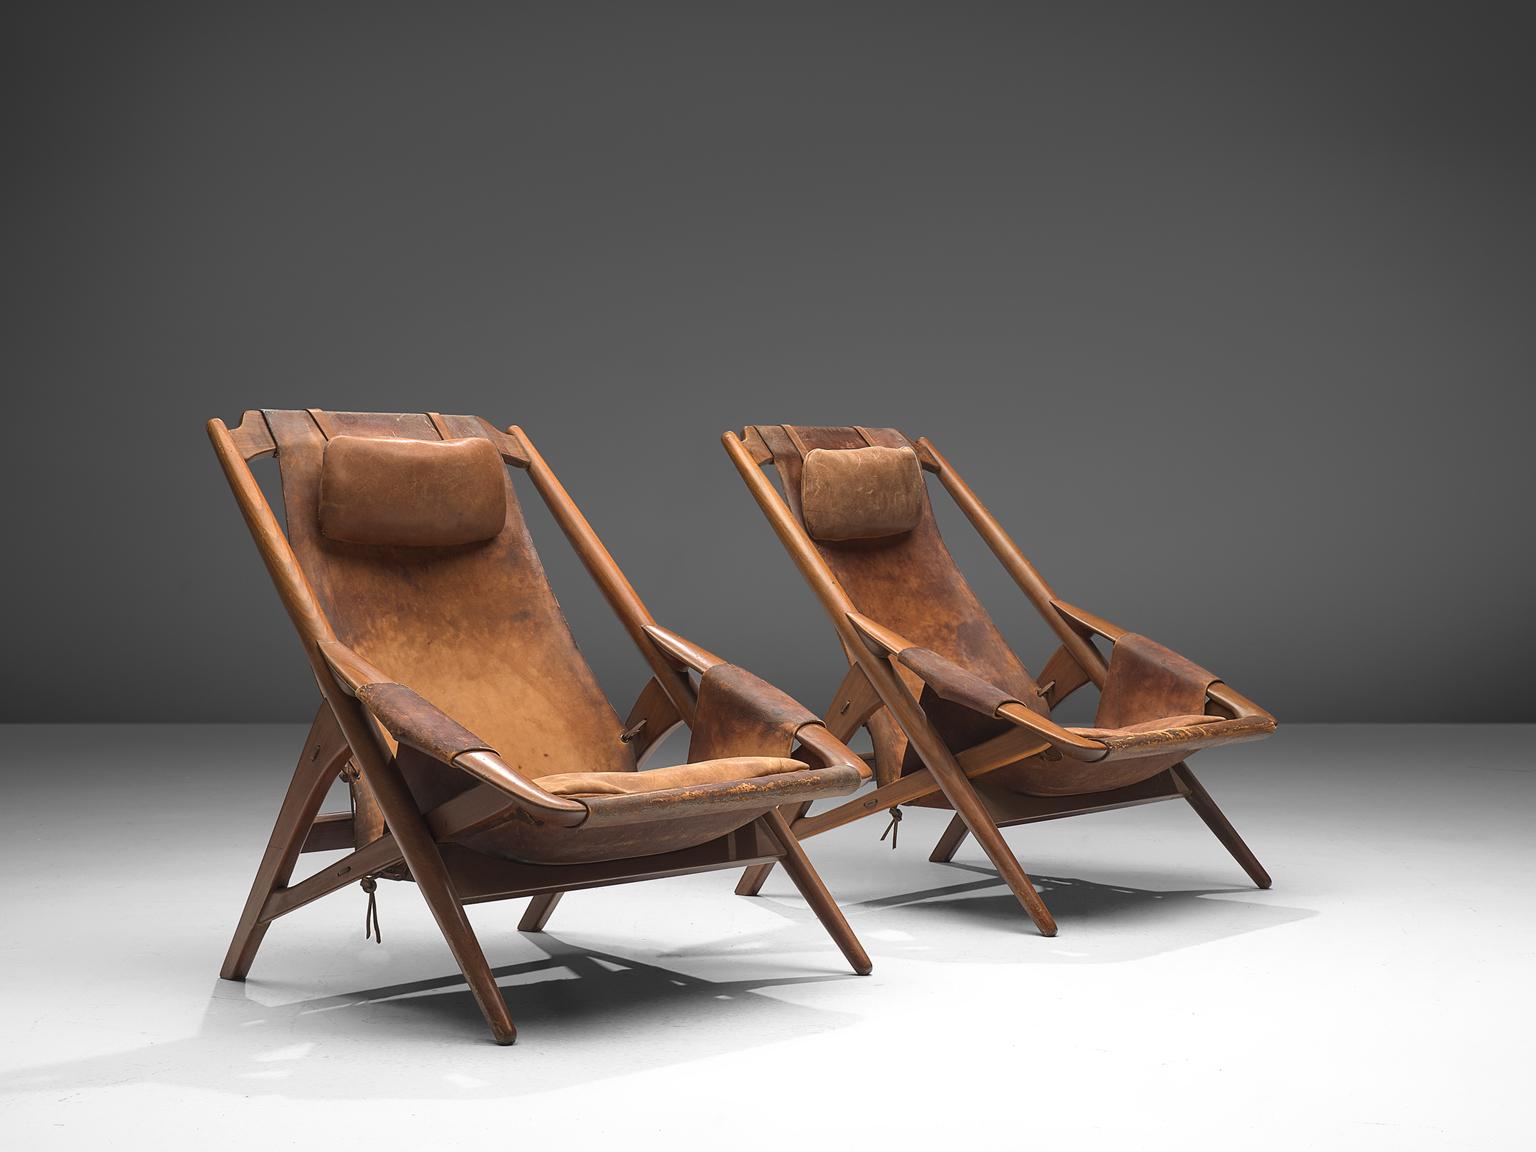 W. Andersag, set of lounge chairs, teak and saddle leather, Italy, 1960s

These chairs are very dynamic due it's design and shapes. The teak frame shows beautiful lines. The frame and construction reminds of the sturdy hunting chairs. Thick saddle